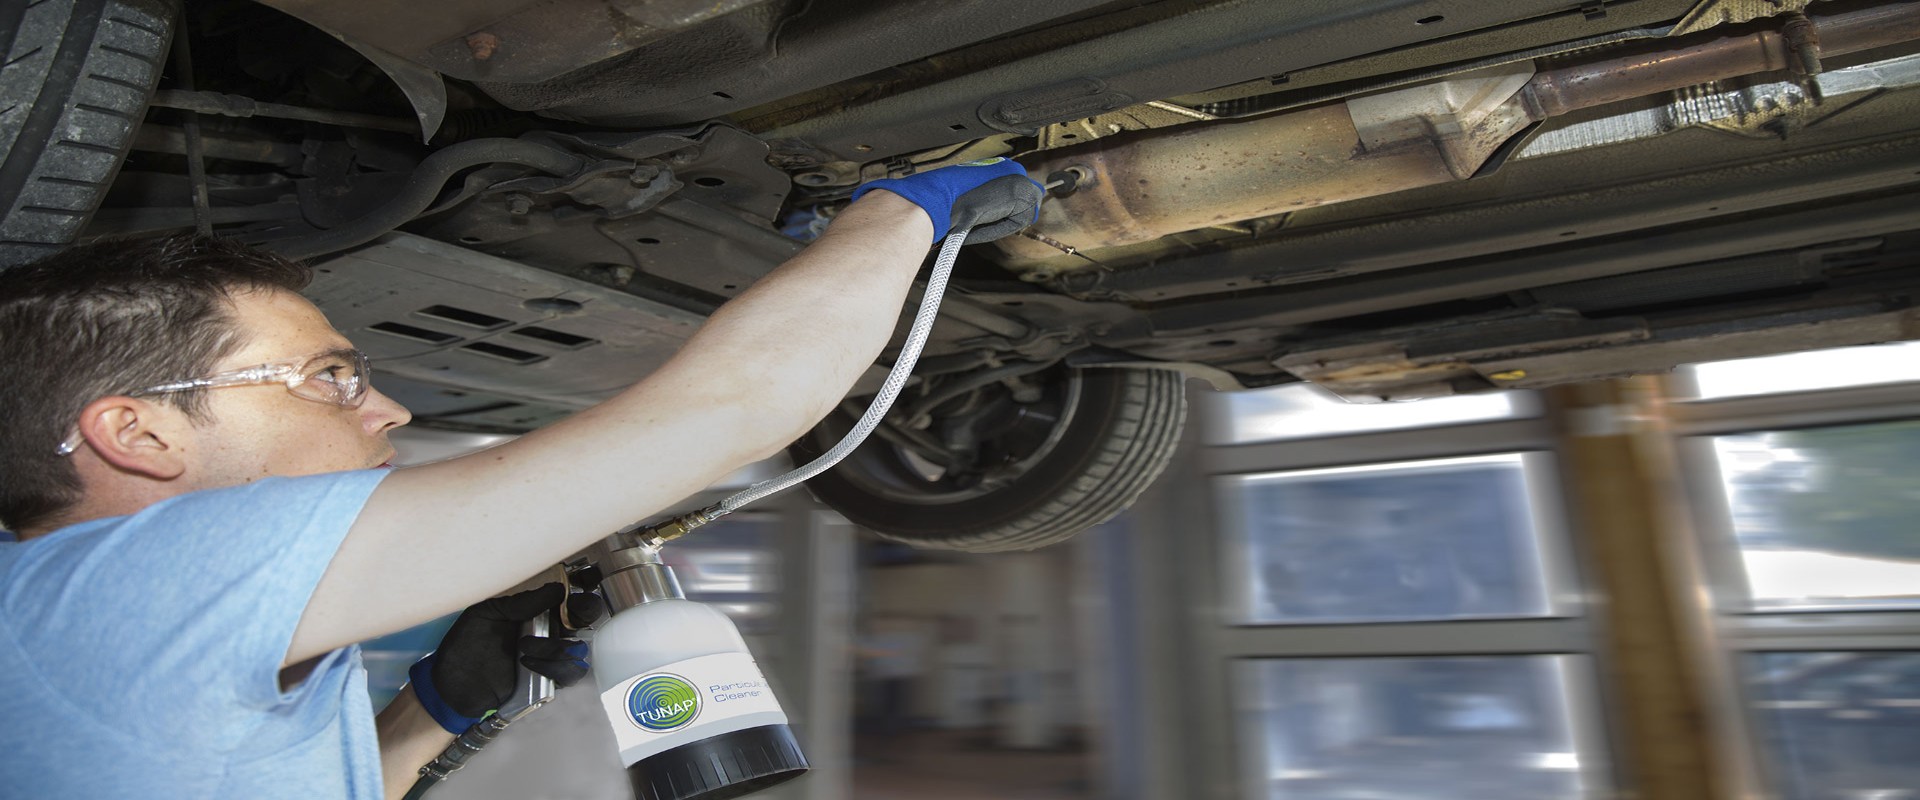 Mechanic under a lifted car using a cup gun with hose and probe to clean a diesel particulate filter